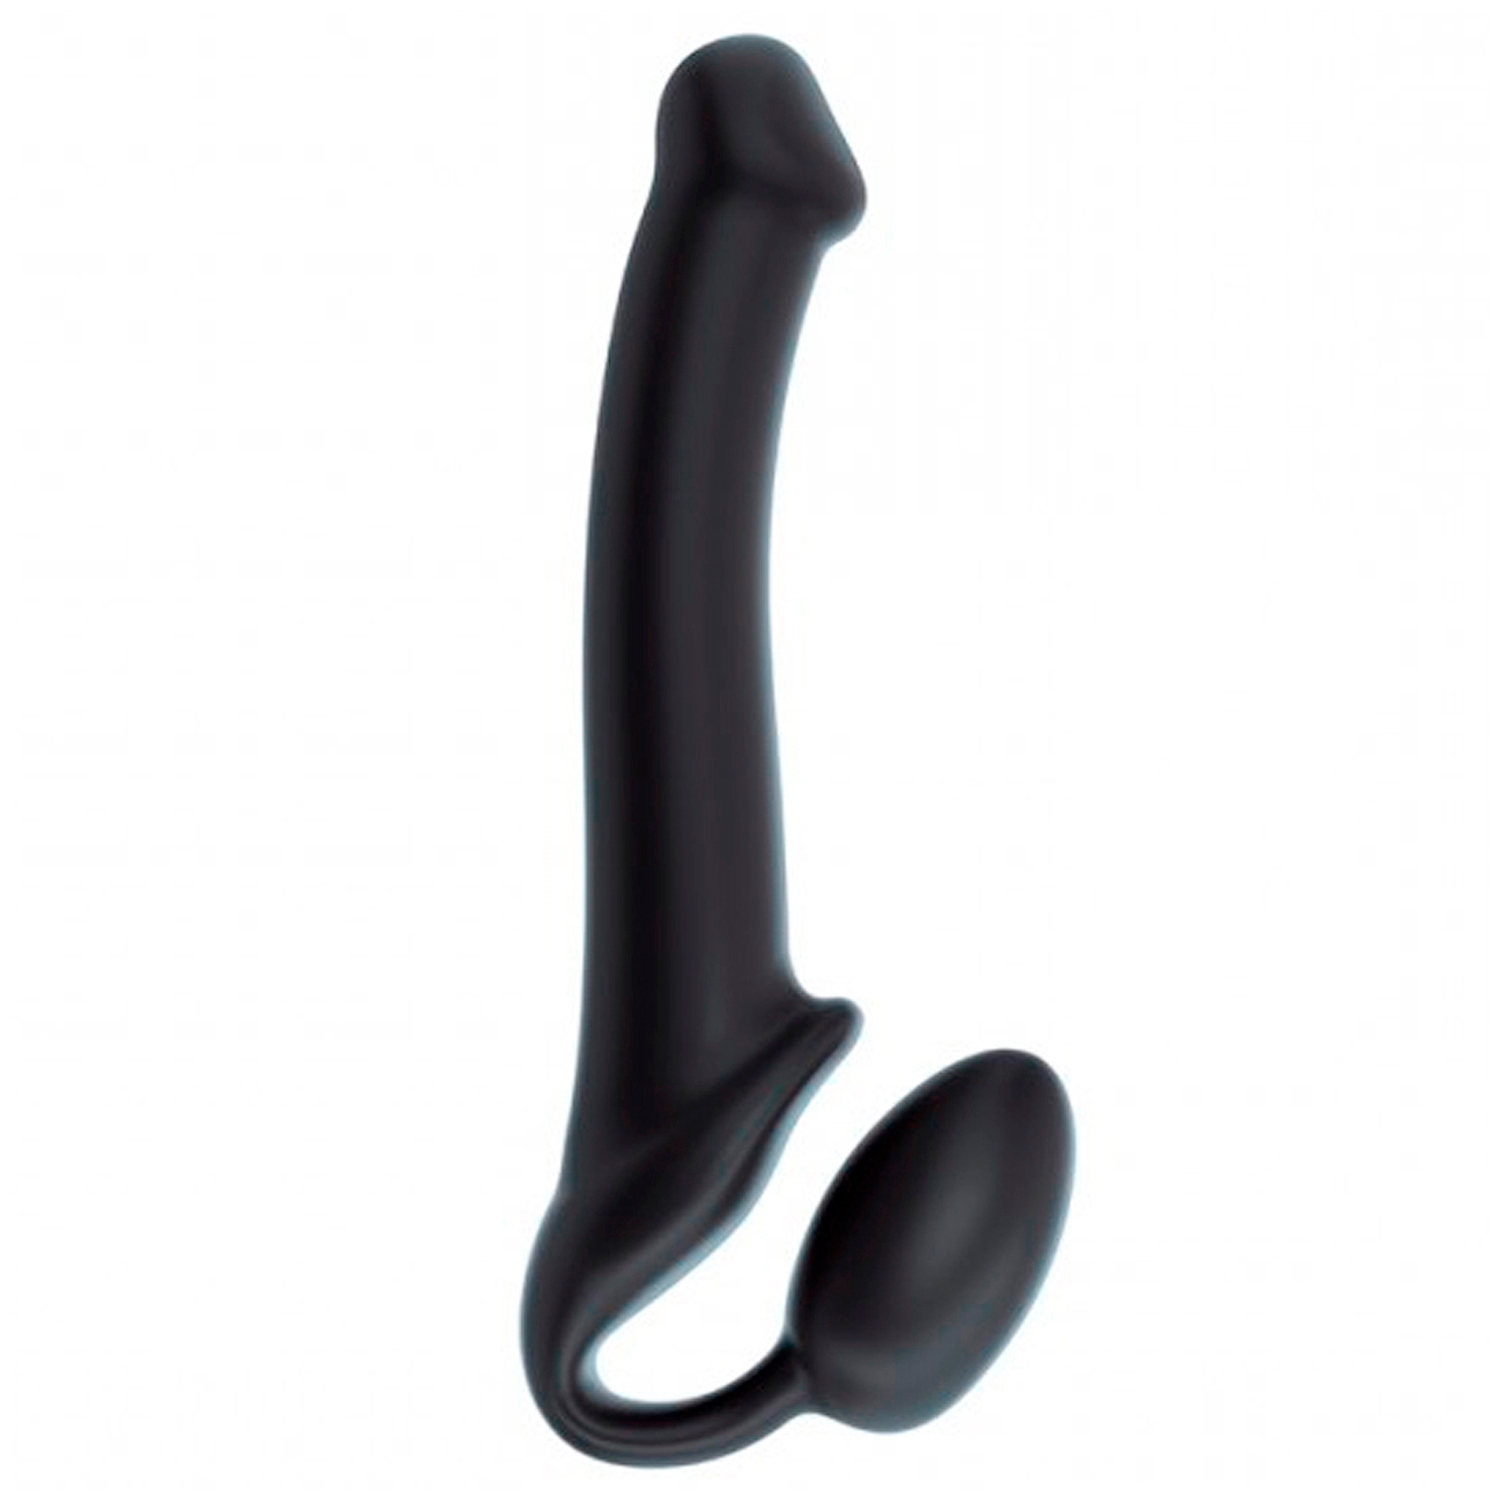 Strap-On-Me Bendable Strap-On Small - Black